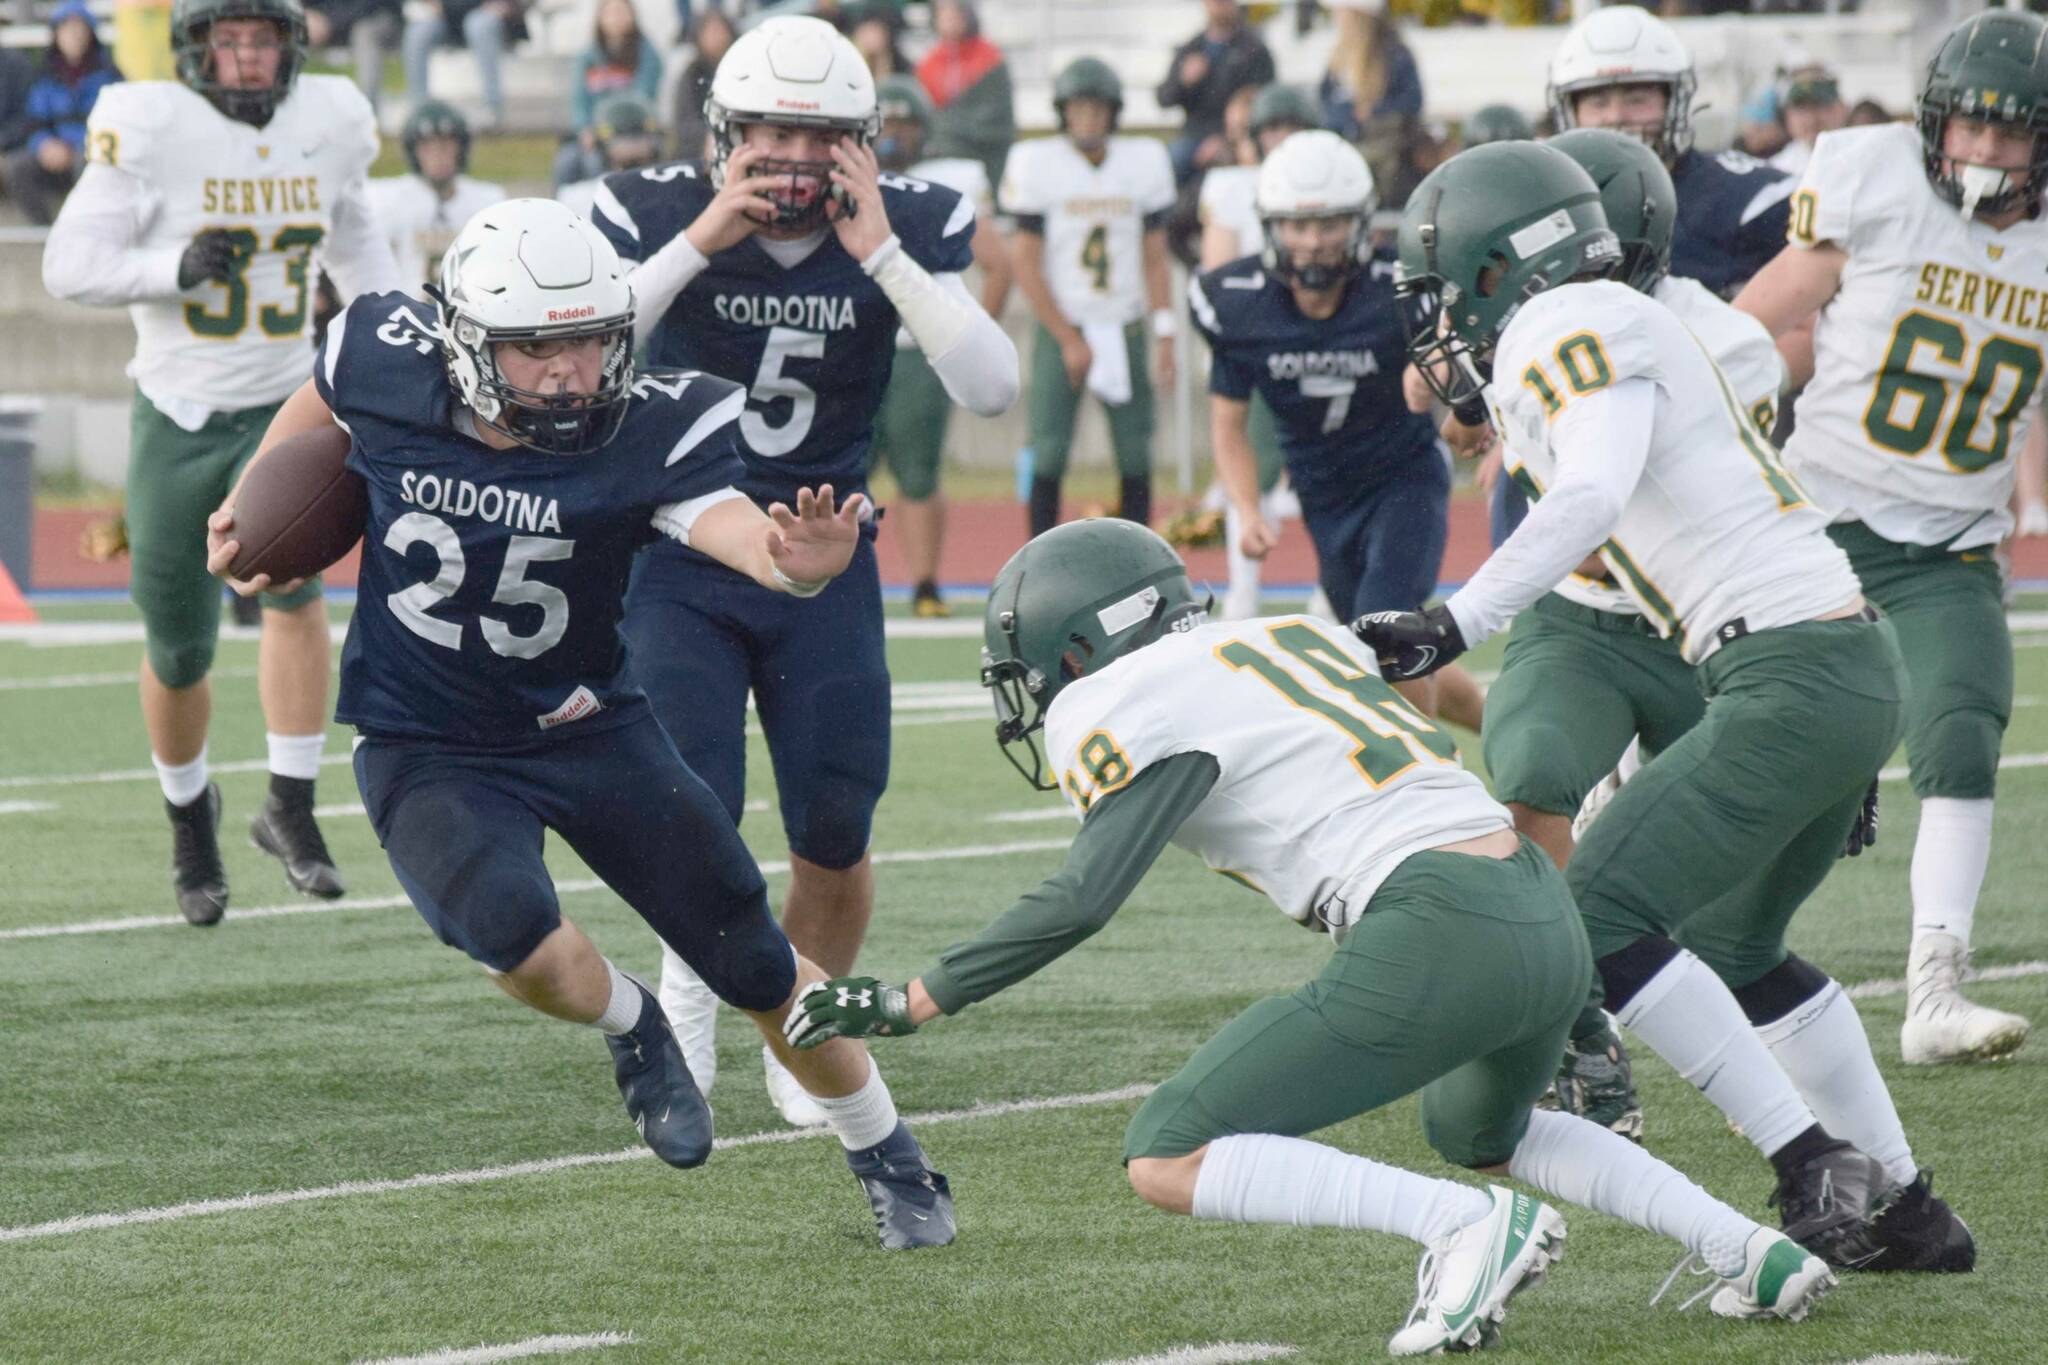 Soldotna's Gehret Medcoff rushes against Service at Justin Maile Field on Friday, Sept. 3, 2021, in Soldotna, Alaska. (Photo by Camille Botello/Peninsula Clarion)